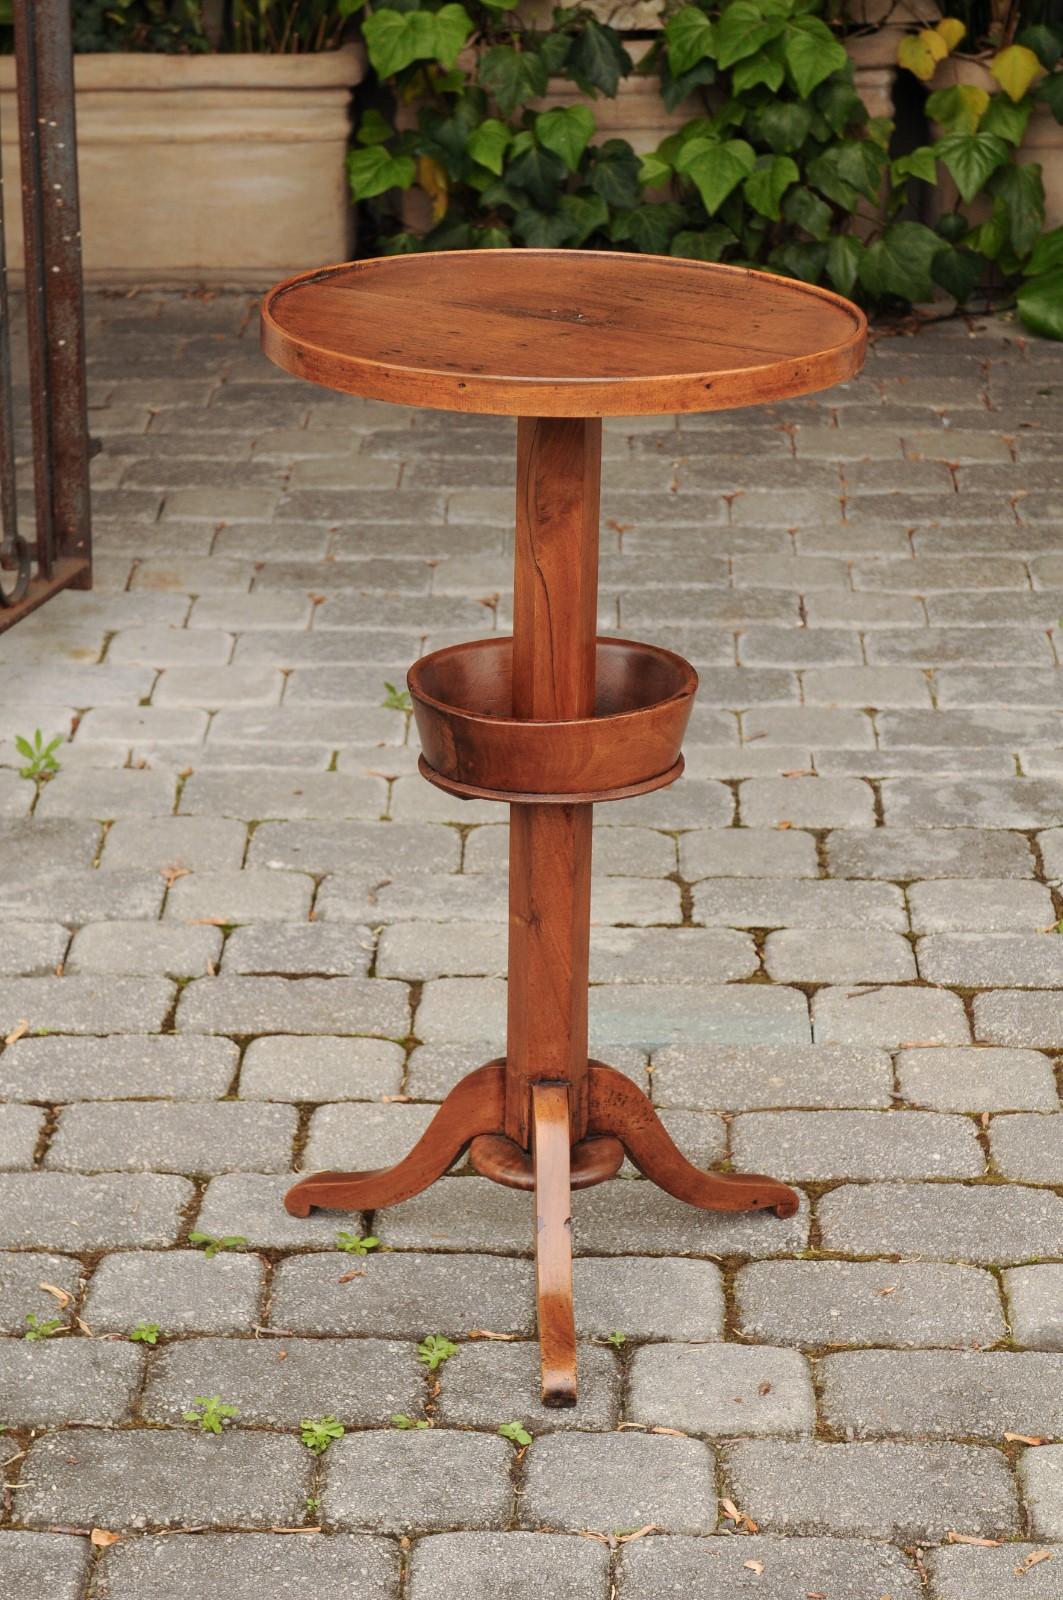 19th Century French Walnut Guéridon Side Table with Circular Top and Tripod Base, circa 1875 For Sale